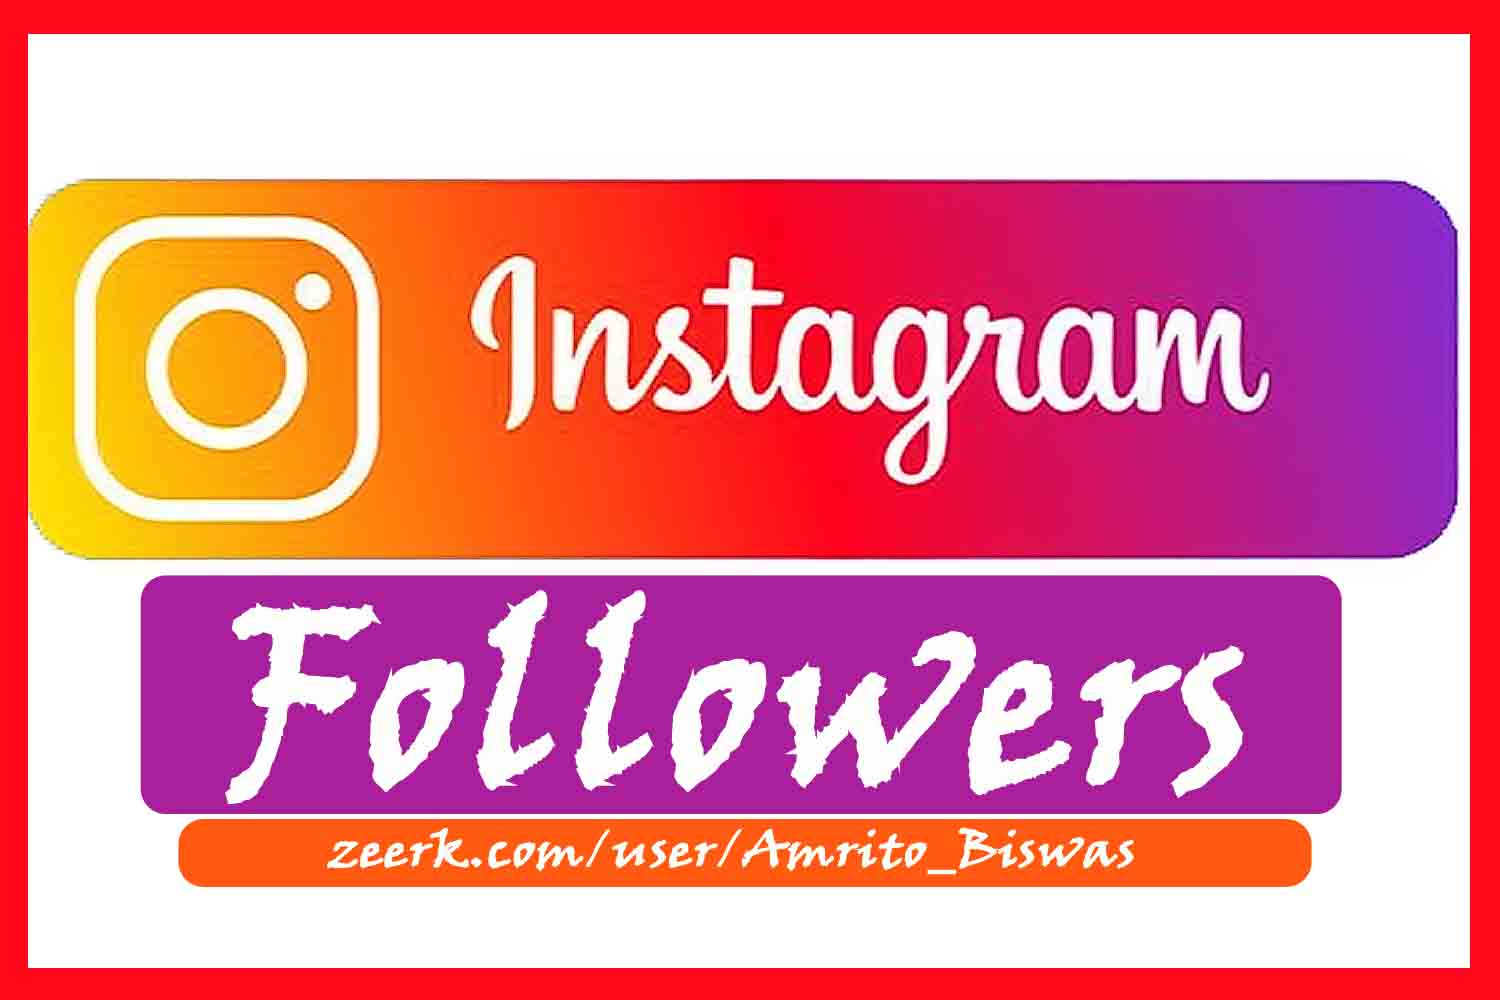 You Will get 1,000+ Instagram Real Followers, All Active User, None Dropped,100% Guarantee